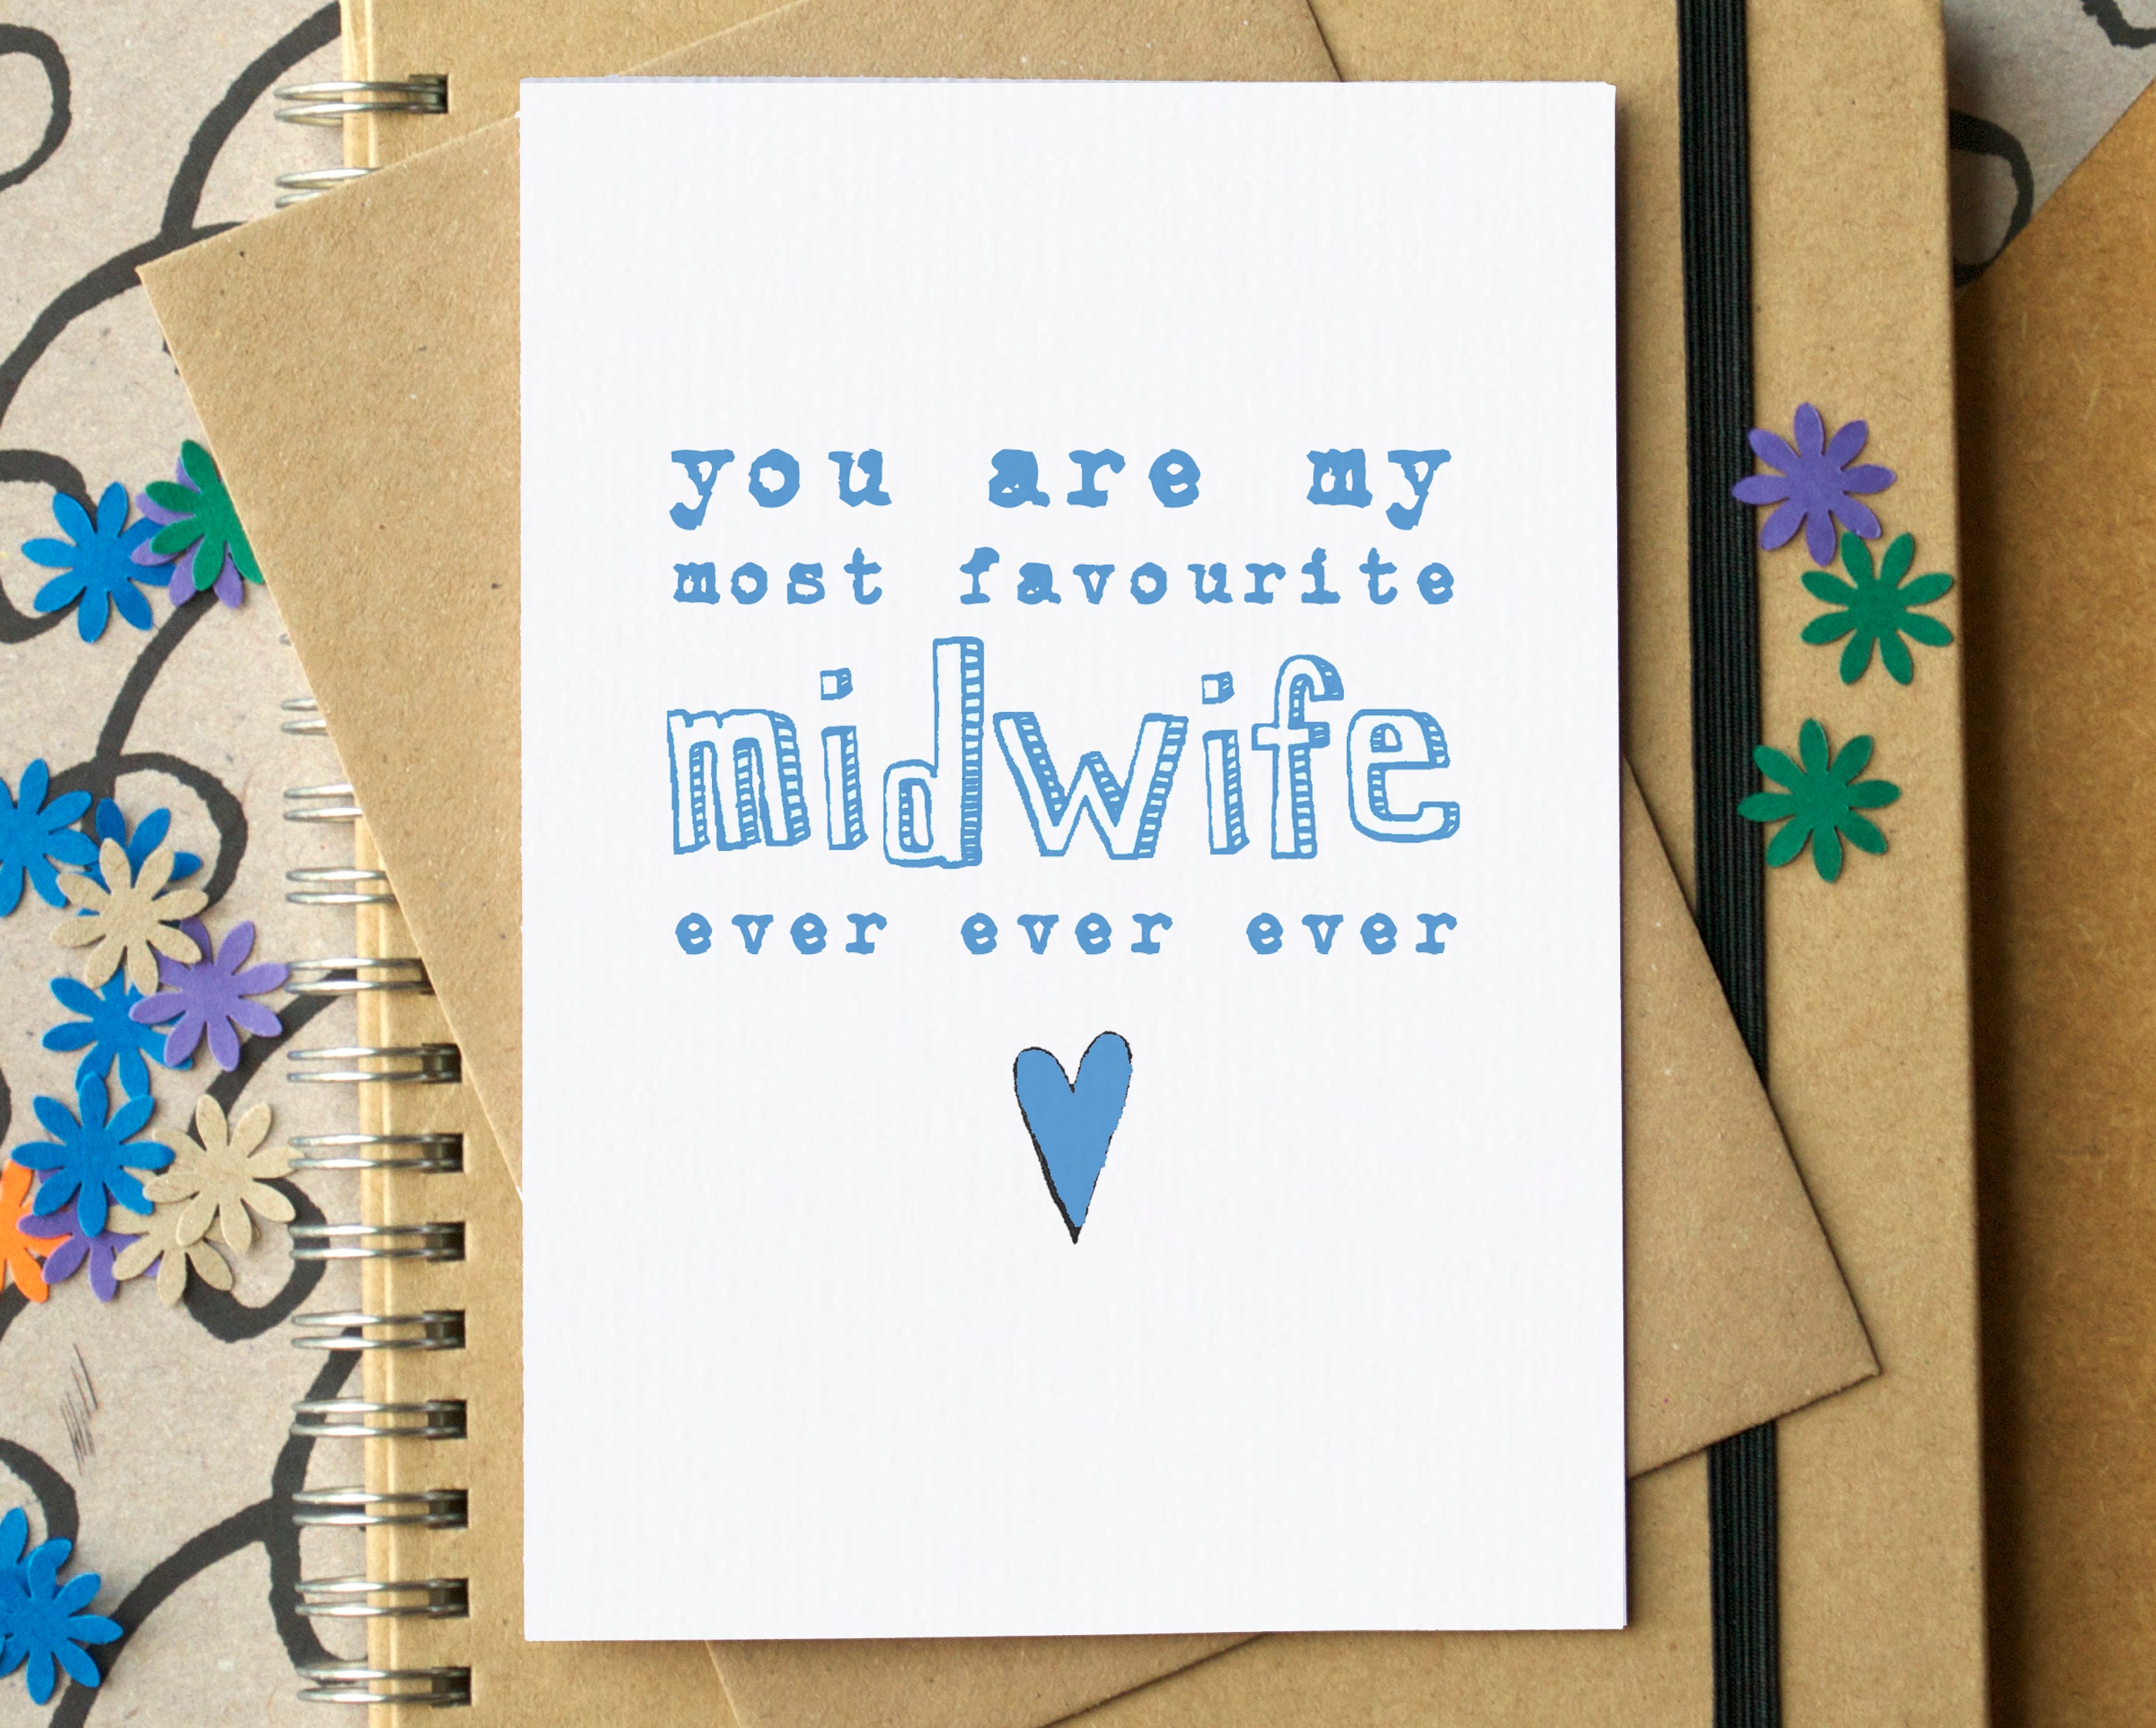 Funny favourite Midwife Thank You Card pic pic image